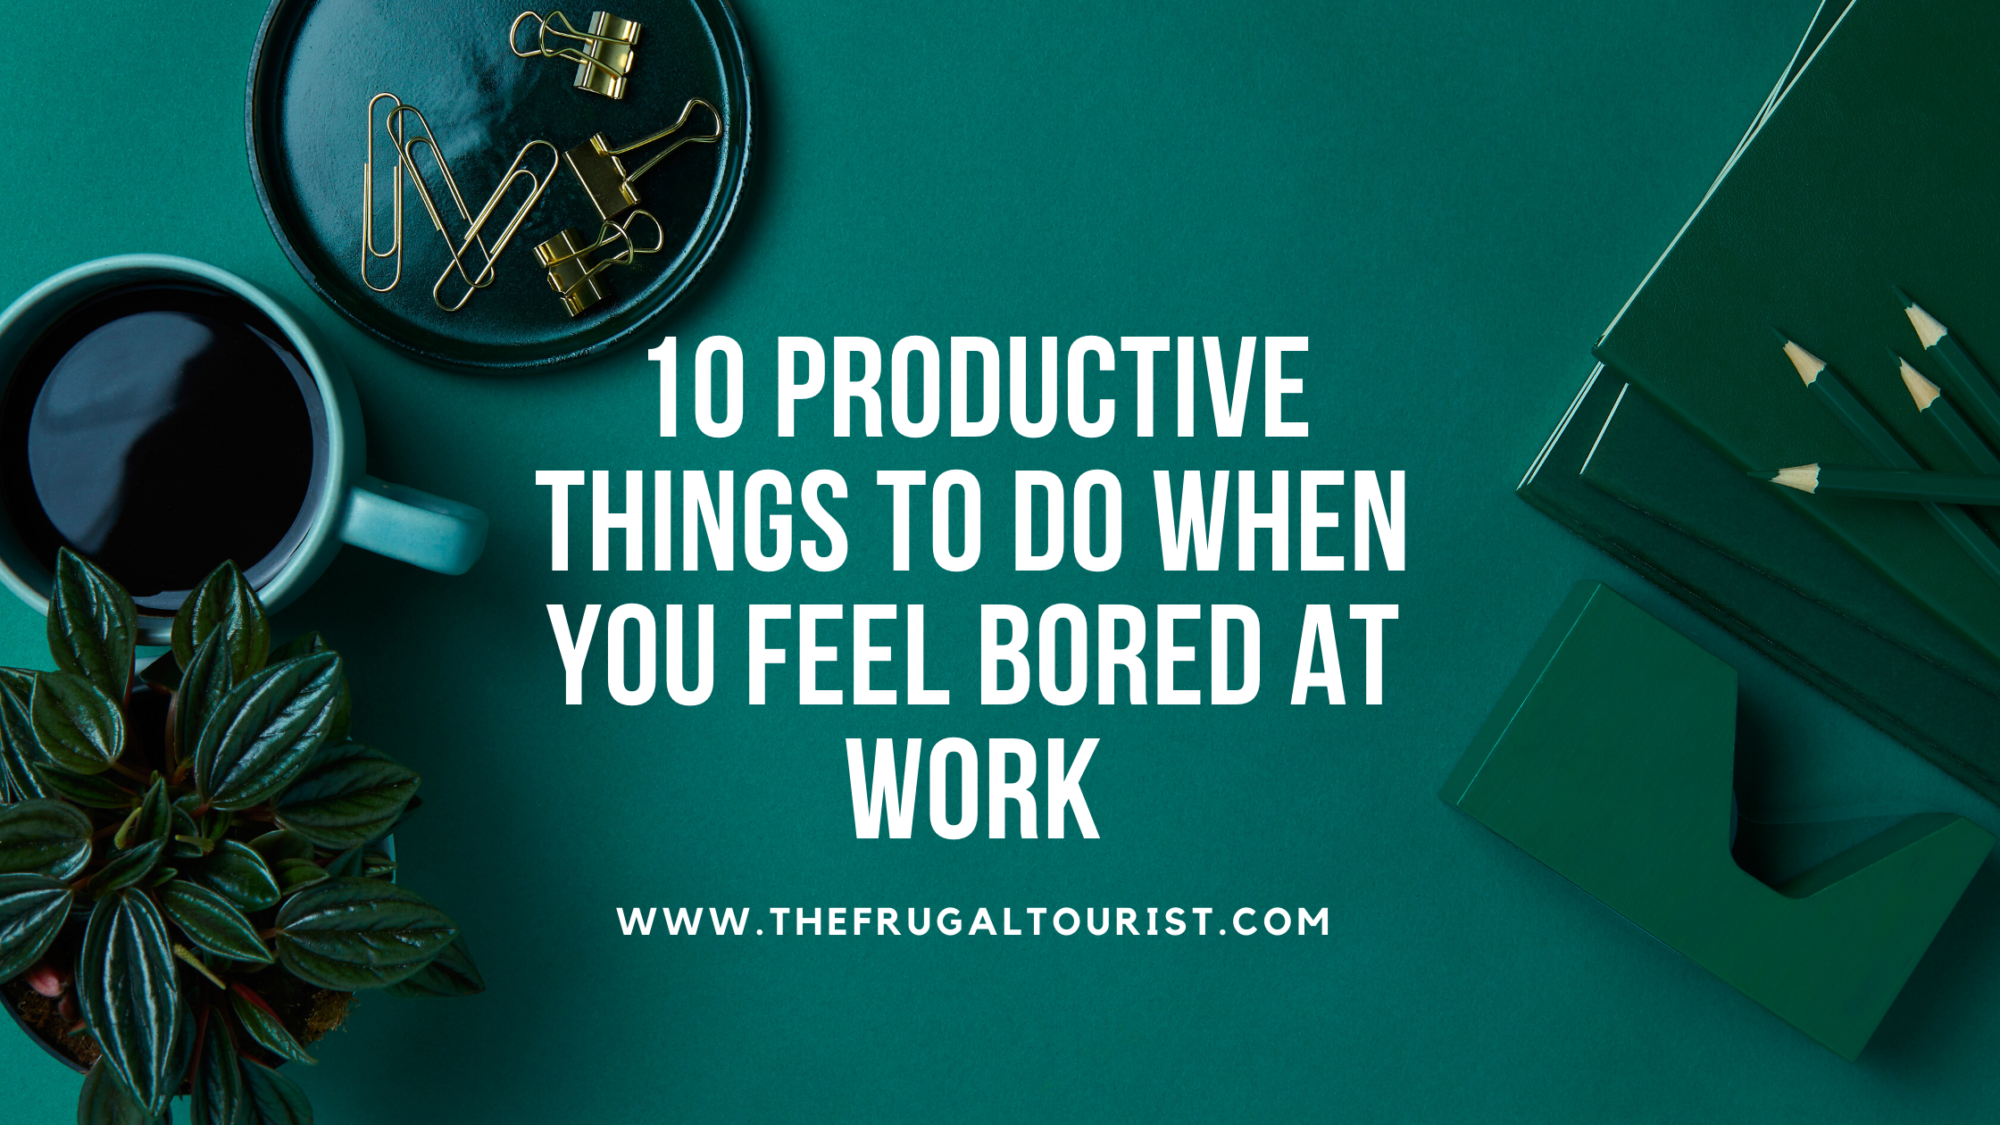 10 PRODUCTIVE THINGS TO DO WHEN YOU FEEL BORED AT WORK